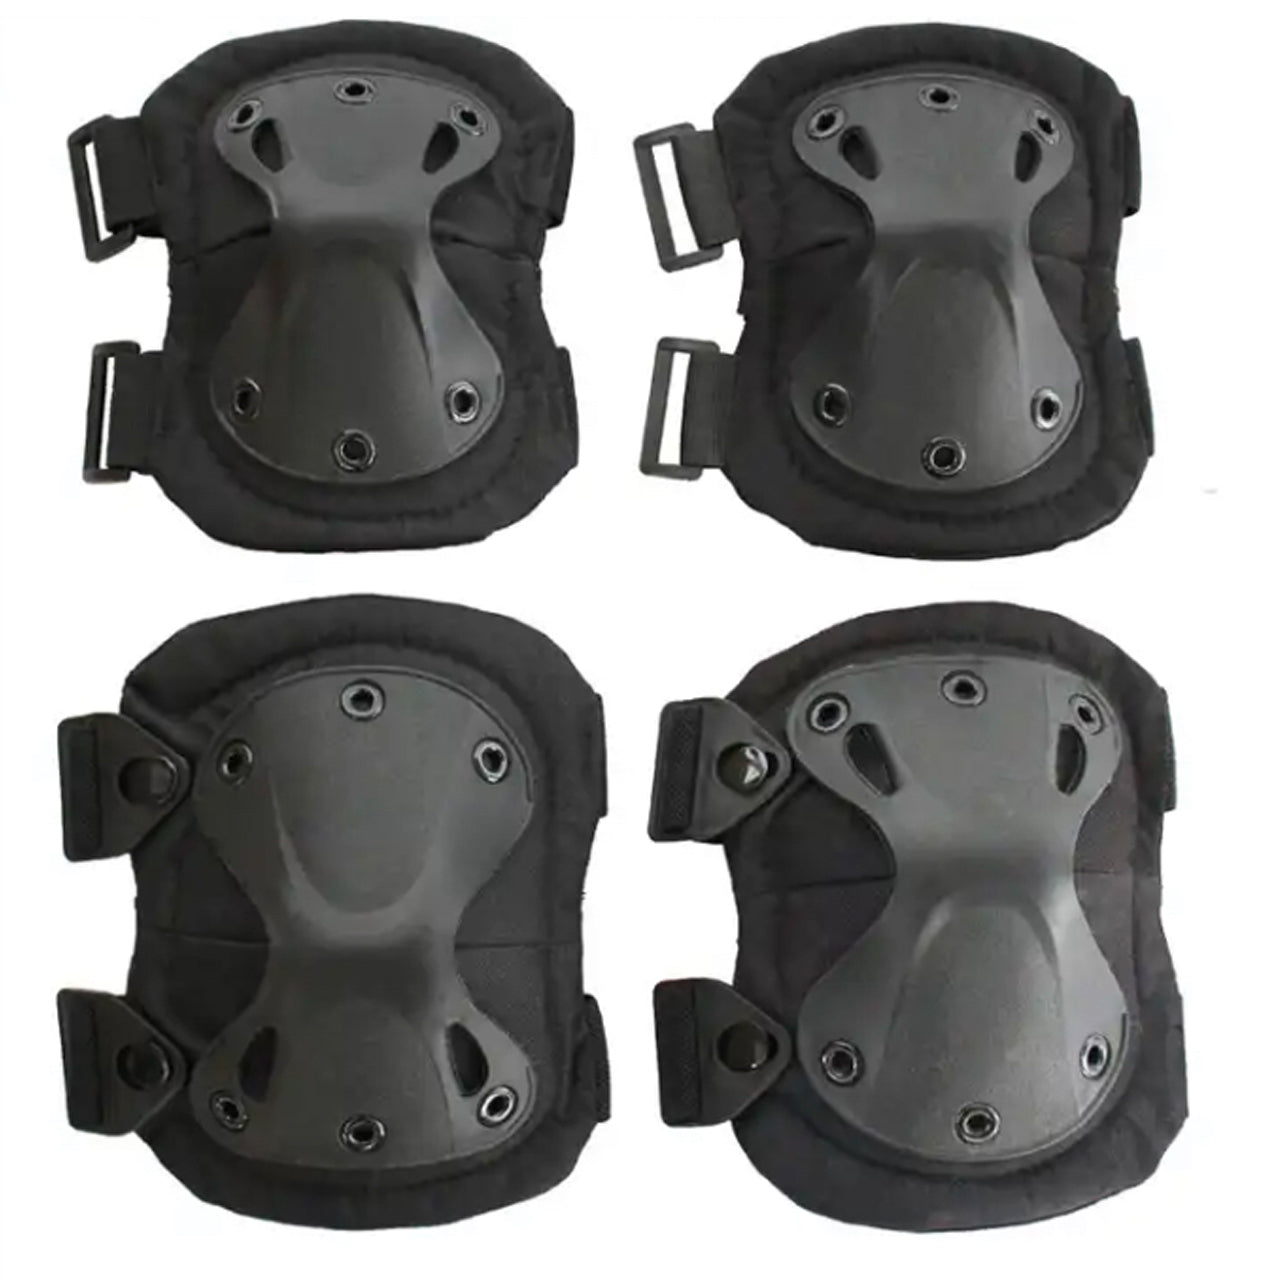 Experience the military lifestyle with our elbow & knee set - allowing you free range of motion without sacrificing protection. Crafted from durable nylon and high-impact polymer for lightweight protection and low drag, www.moralepatches.com.au